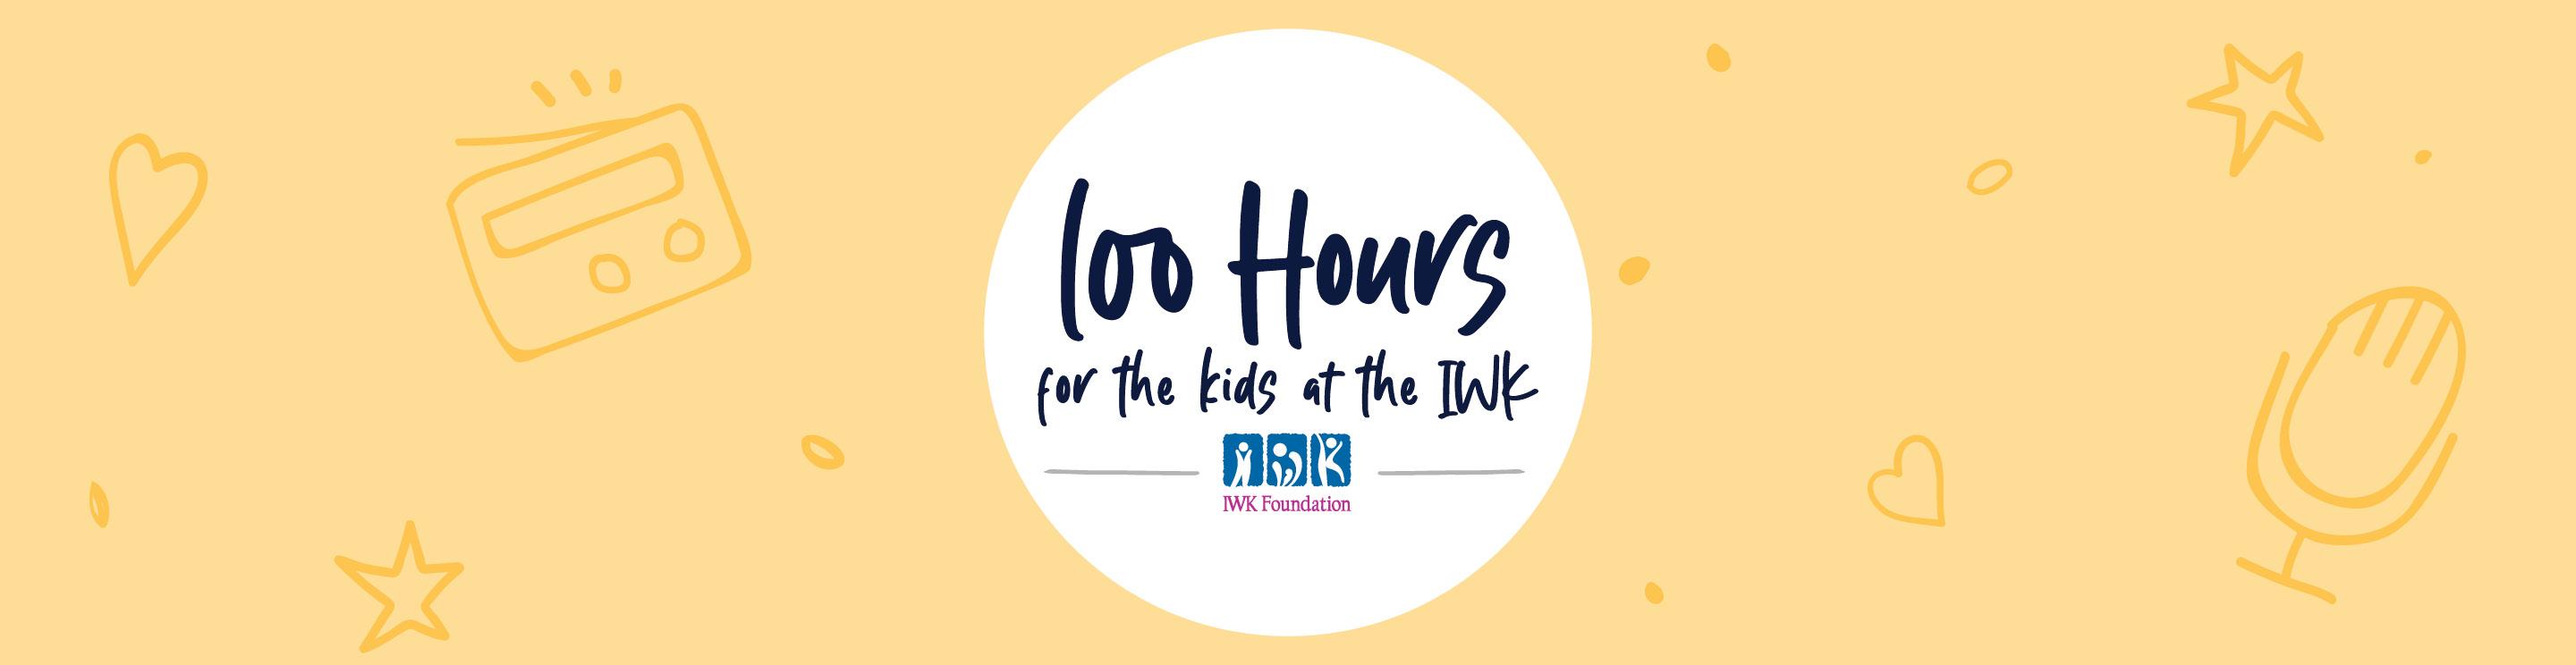 100 Hours for the Kids logo